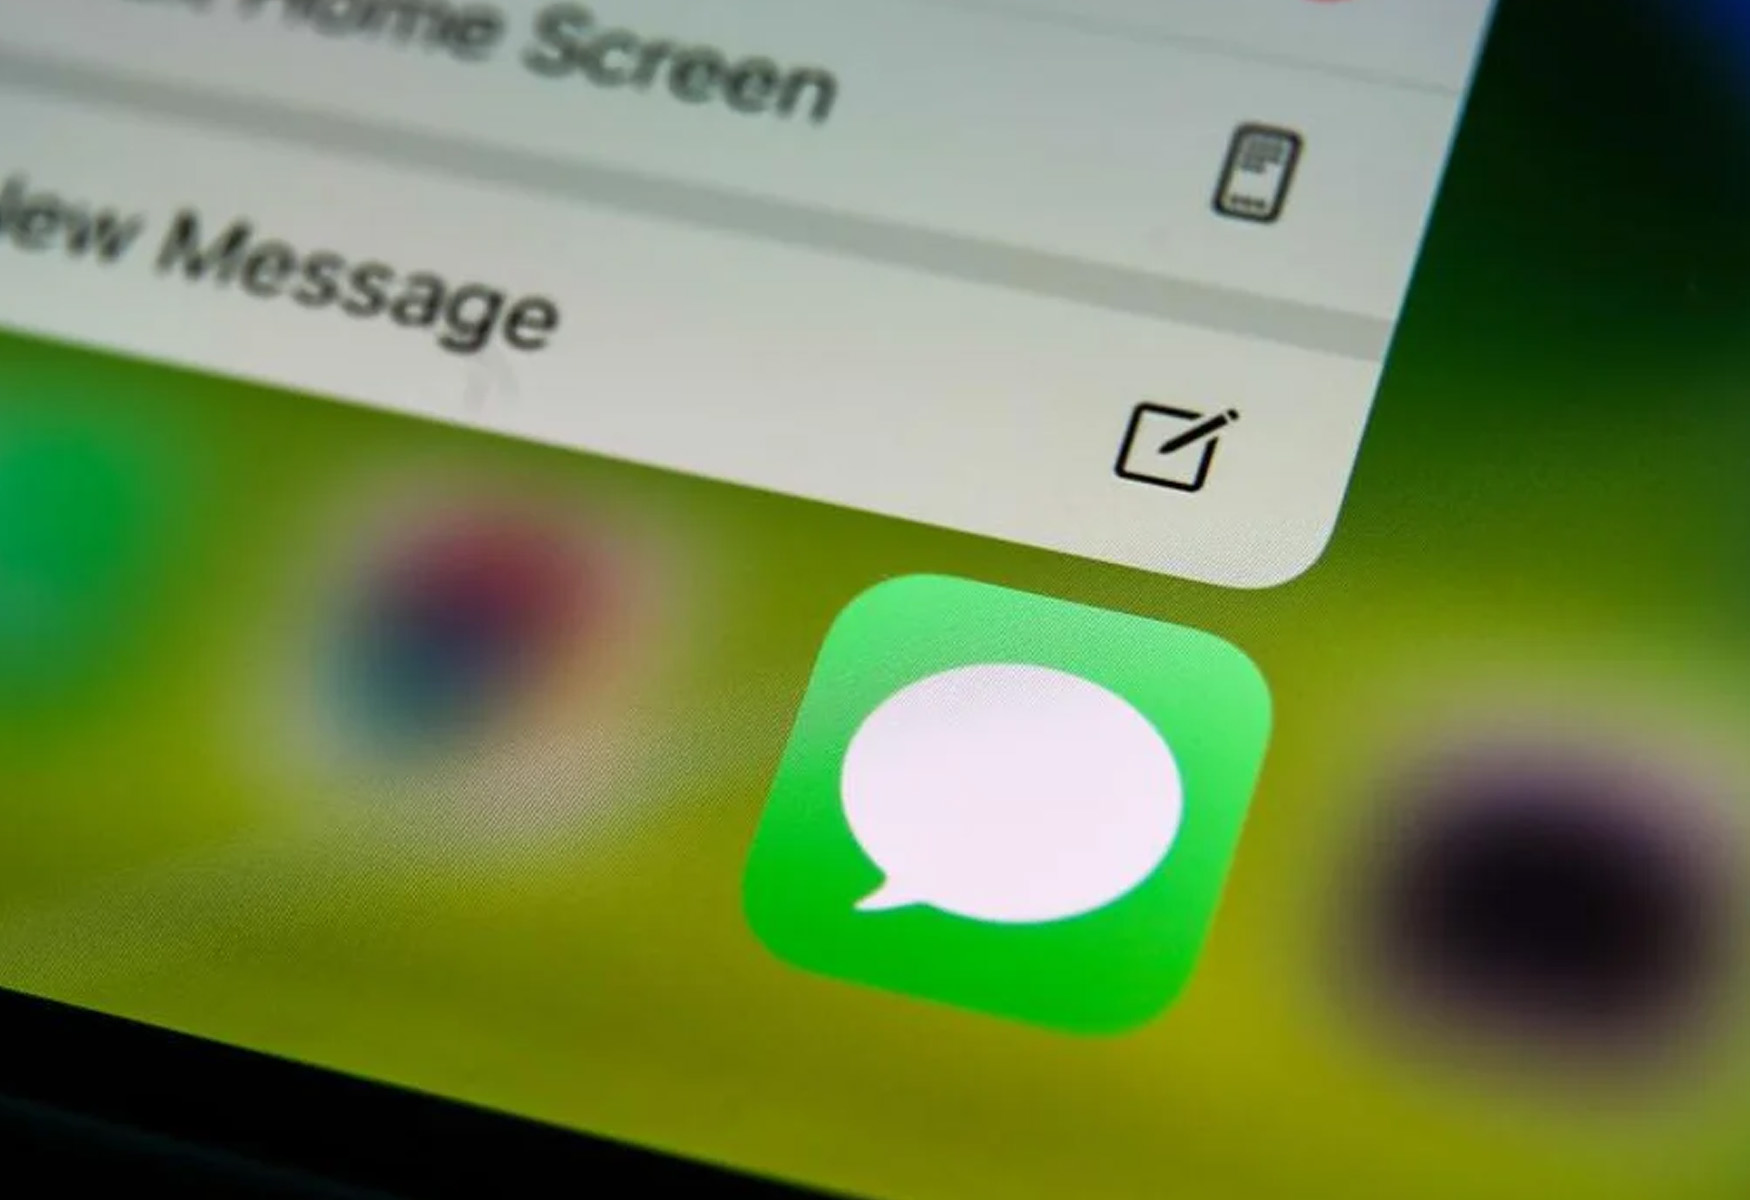 EU Considers Excluding IMessage From Interoperability Regulation, Bloomberg Reports